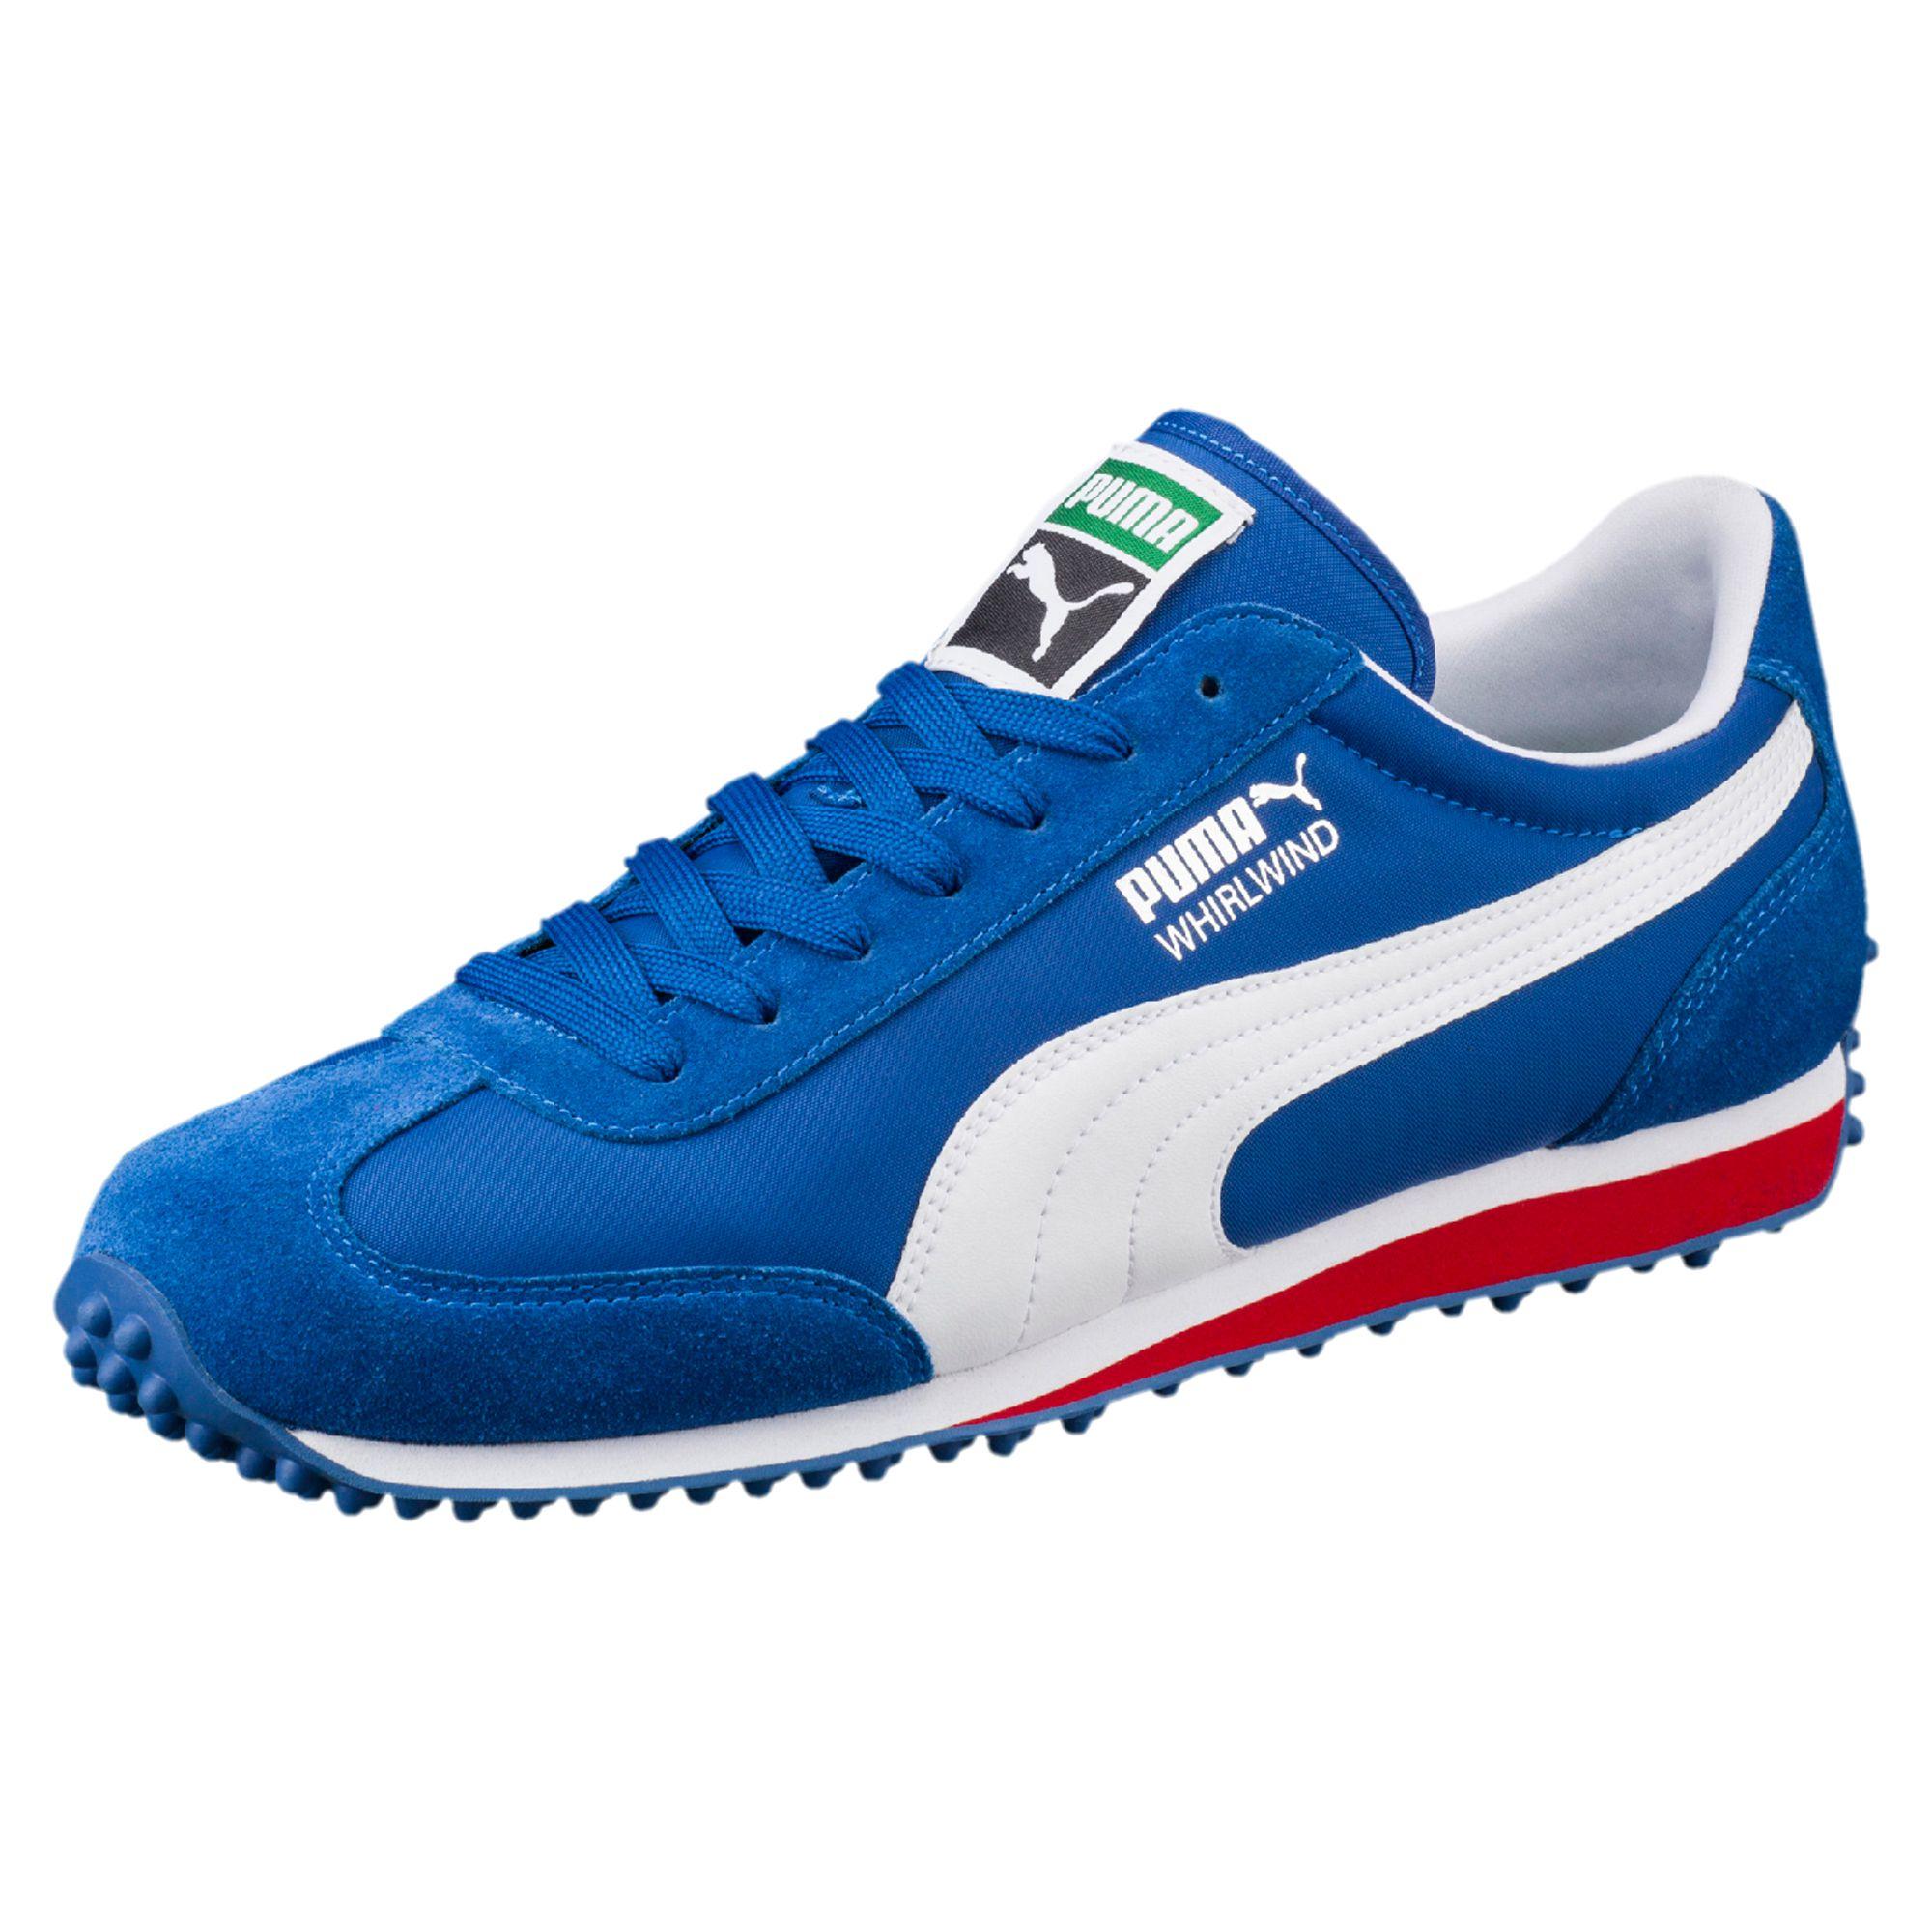 PUMA Synthetic Whirlwind Classic Men's Sneakers in Blue for Men - Lyst